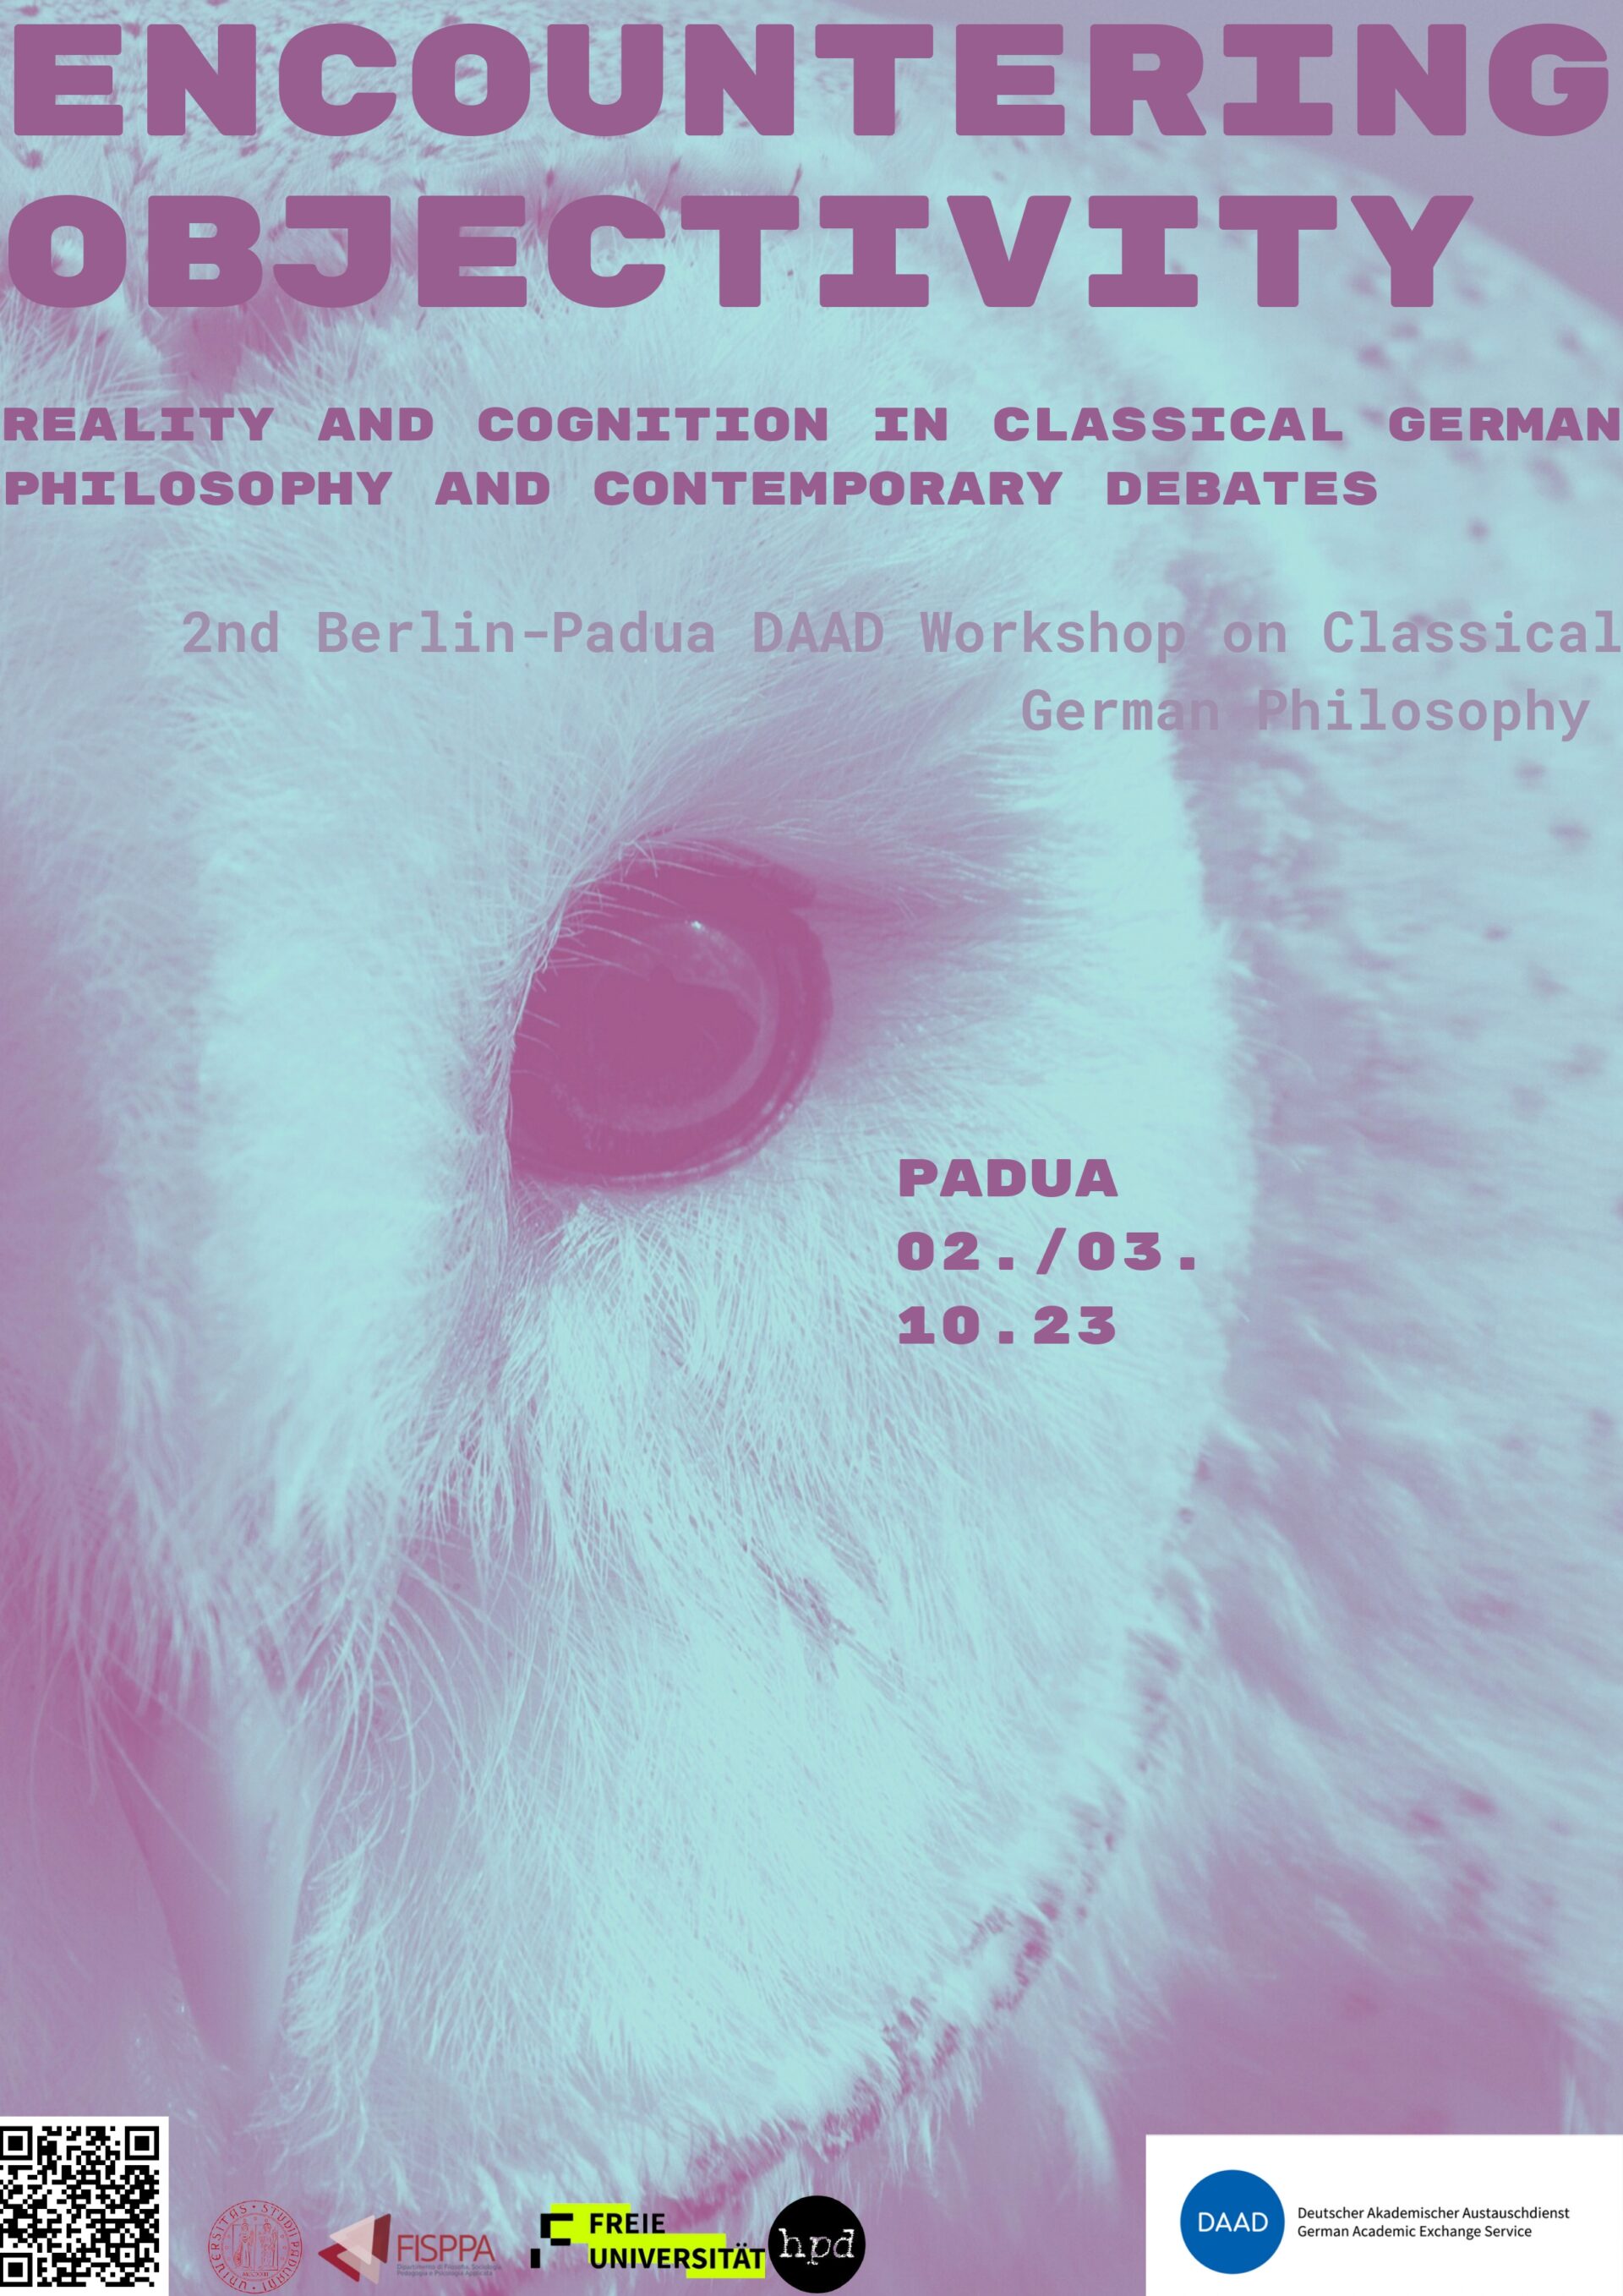 2nd Berlin-Padua DAAD workshop on Classical German Philosophy: “Encountering Objectivity. Reality and Cognition between German Classical Philosophy and Contemporary Debates” (Padova, 2nd-3rd October, 2023)